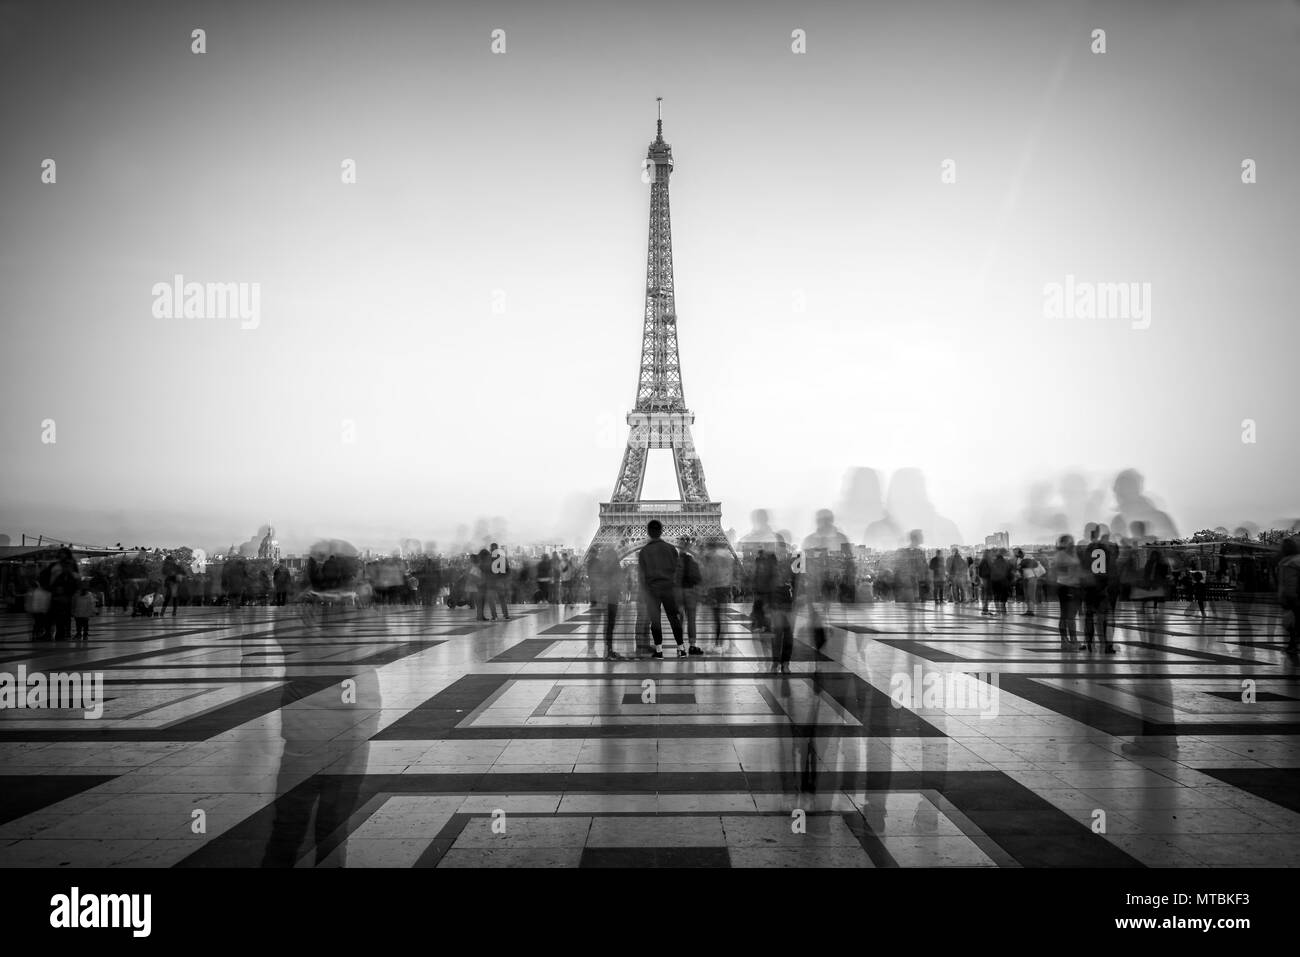 Blurred people on Trocadero square admiring the Eiffel tower, Paris, France Stock Photo